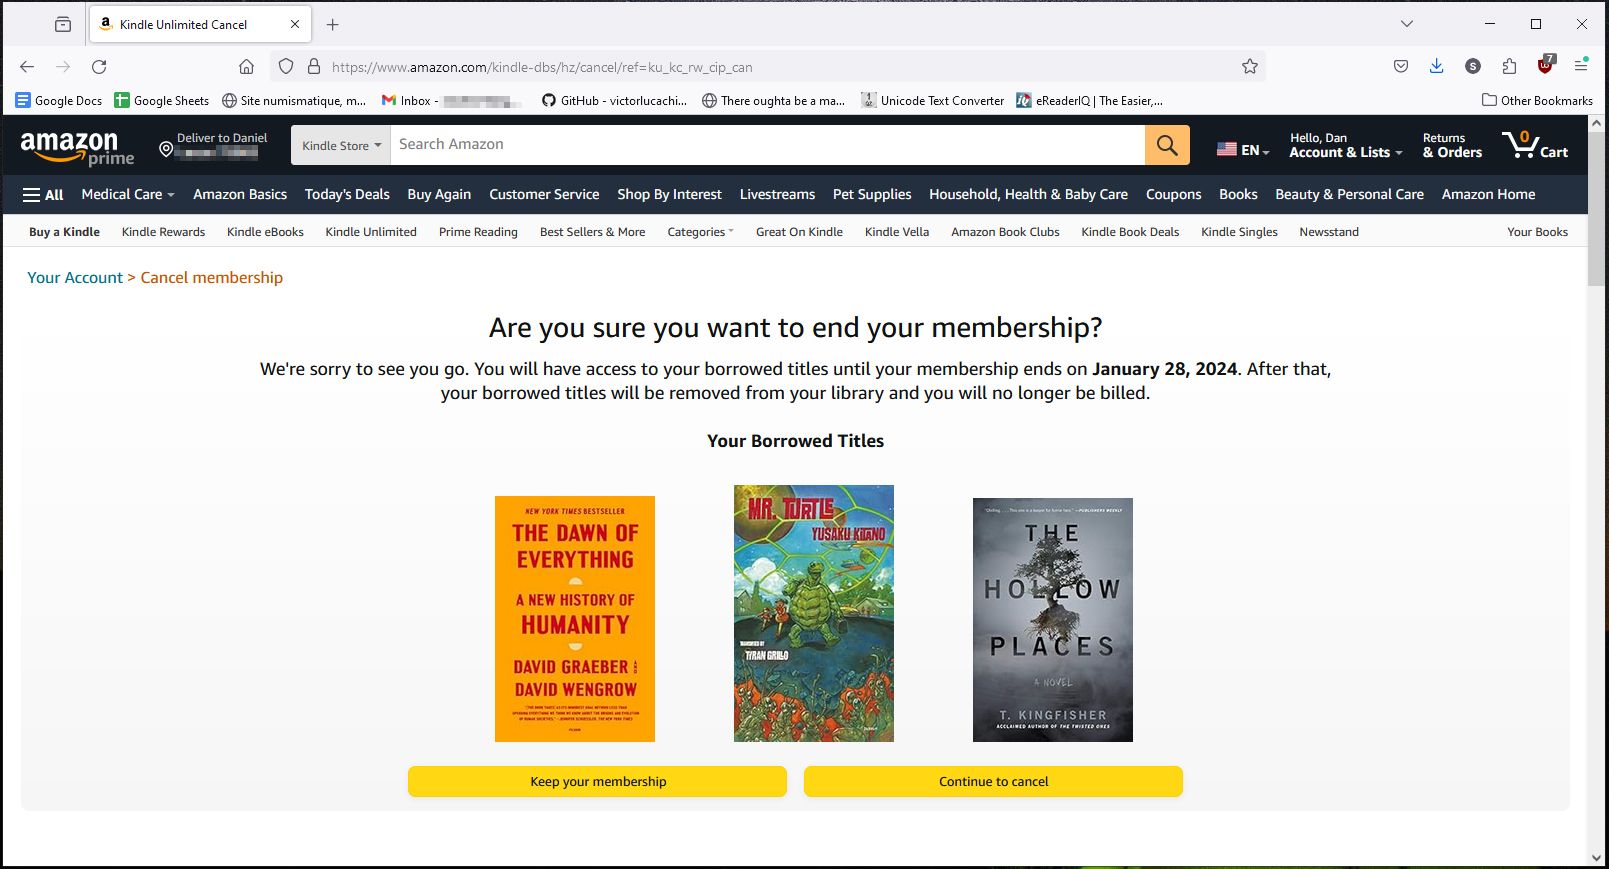 Kindle Unlimited: Everything you need to know